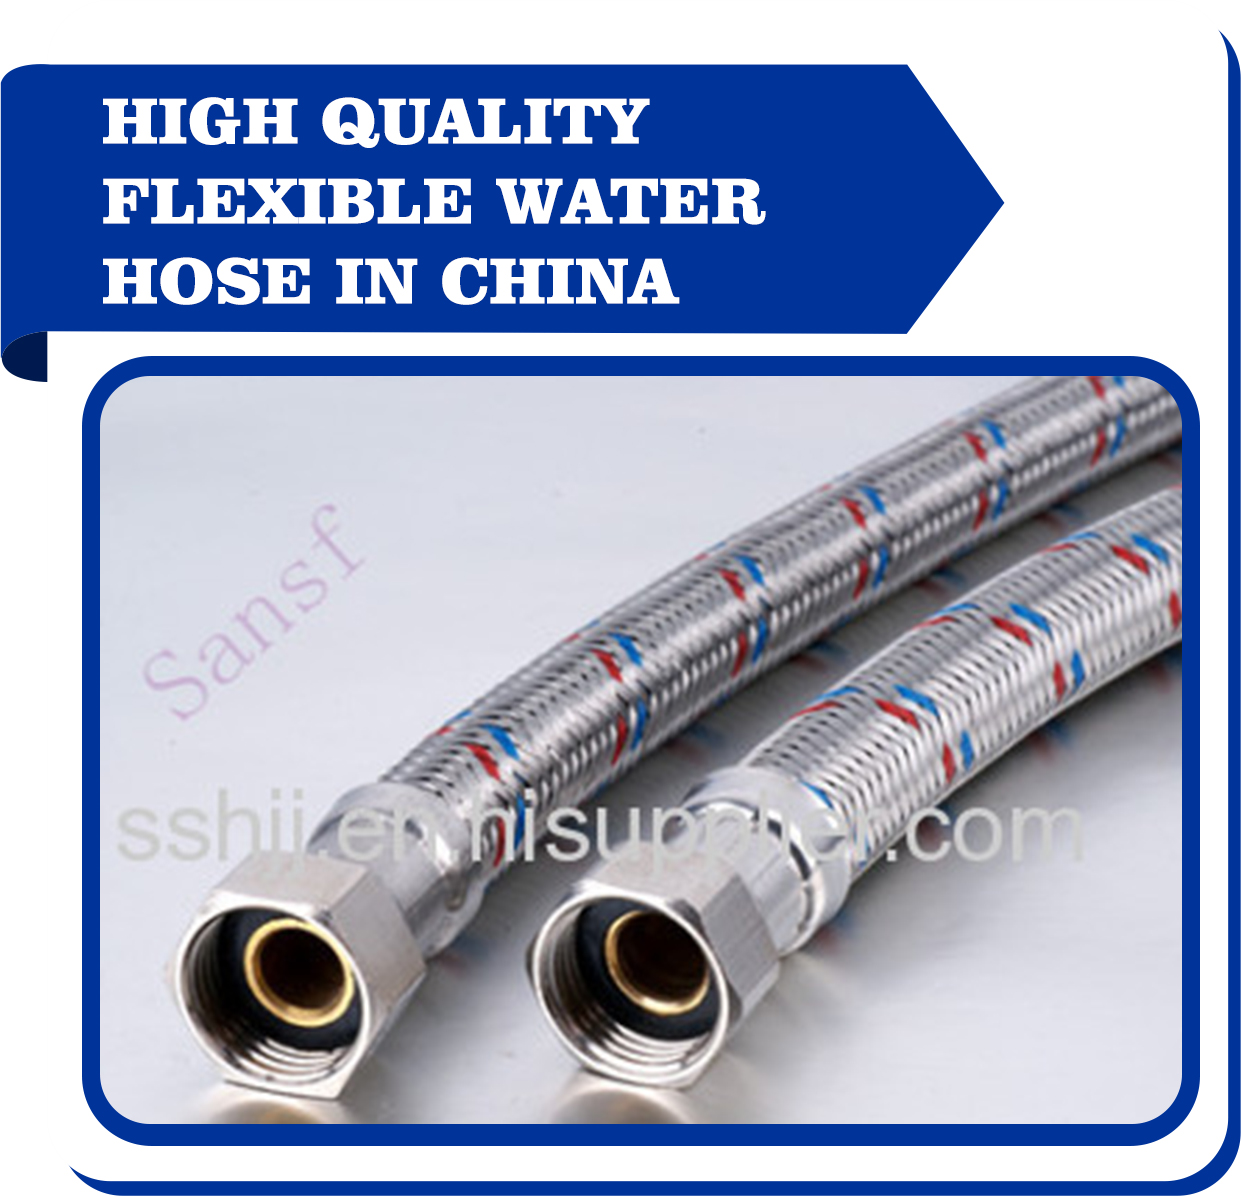 High quality flexible water hose